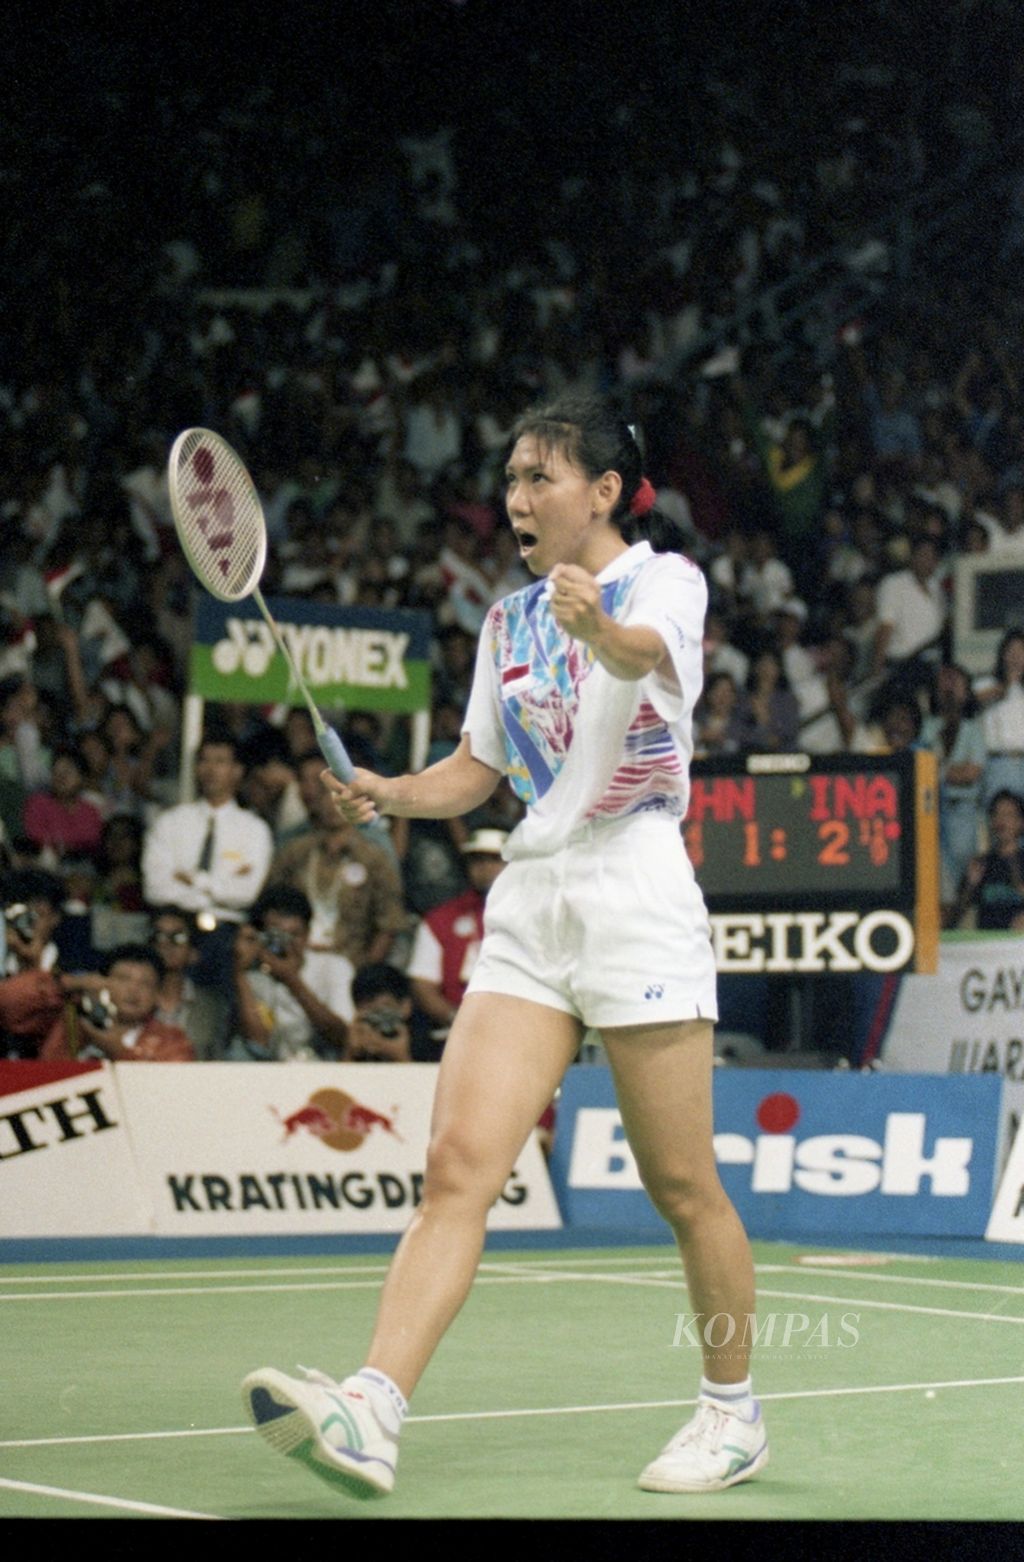 Susy Susanti opened Indonesia's victory when facing off against China's player, Ye Zhaoying, in the opening match of the Uber Cup final at Istora Senayan, Jakarta, on Friday (20/5/1994). Susy won 11-4, 12-10.